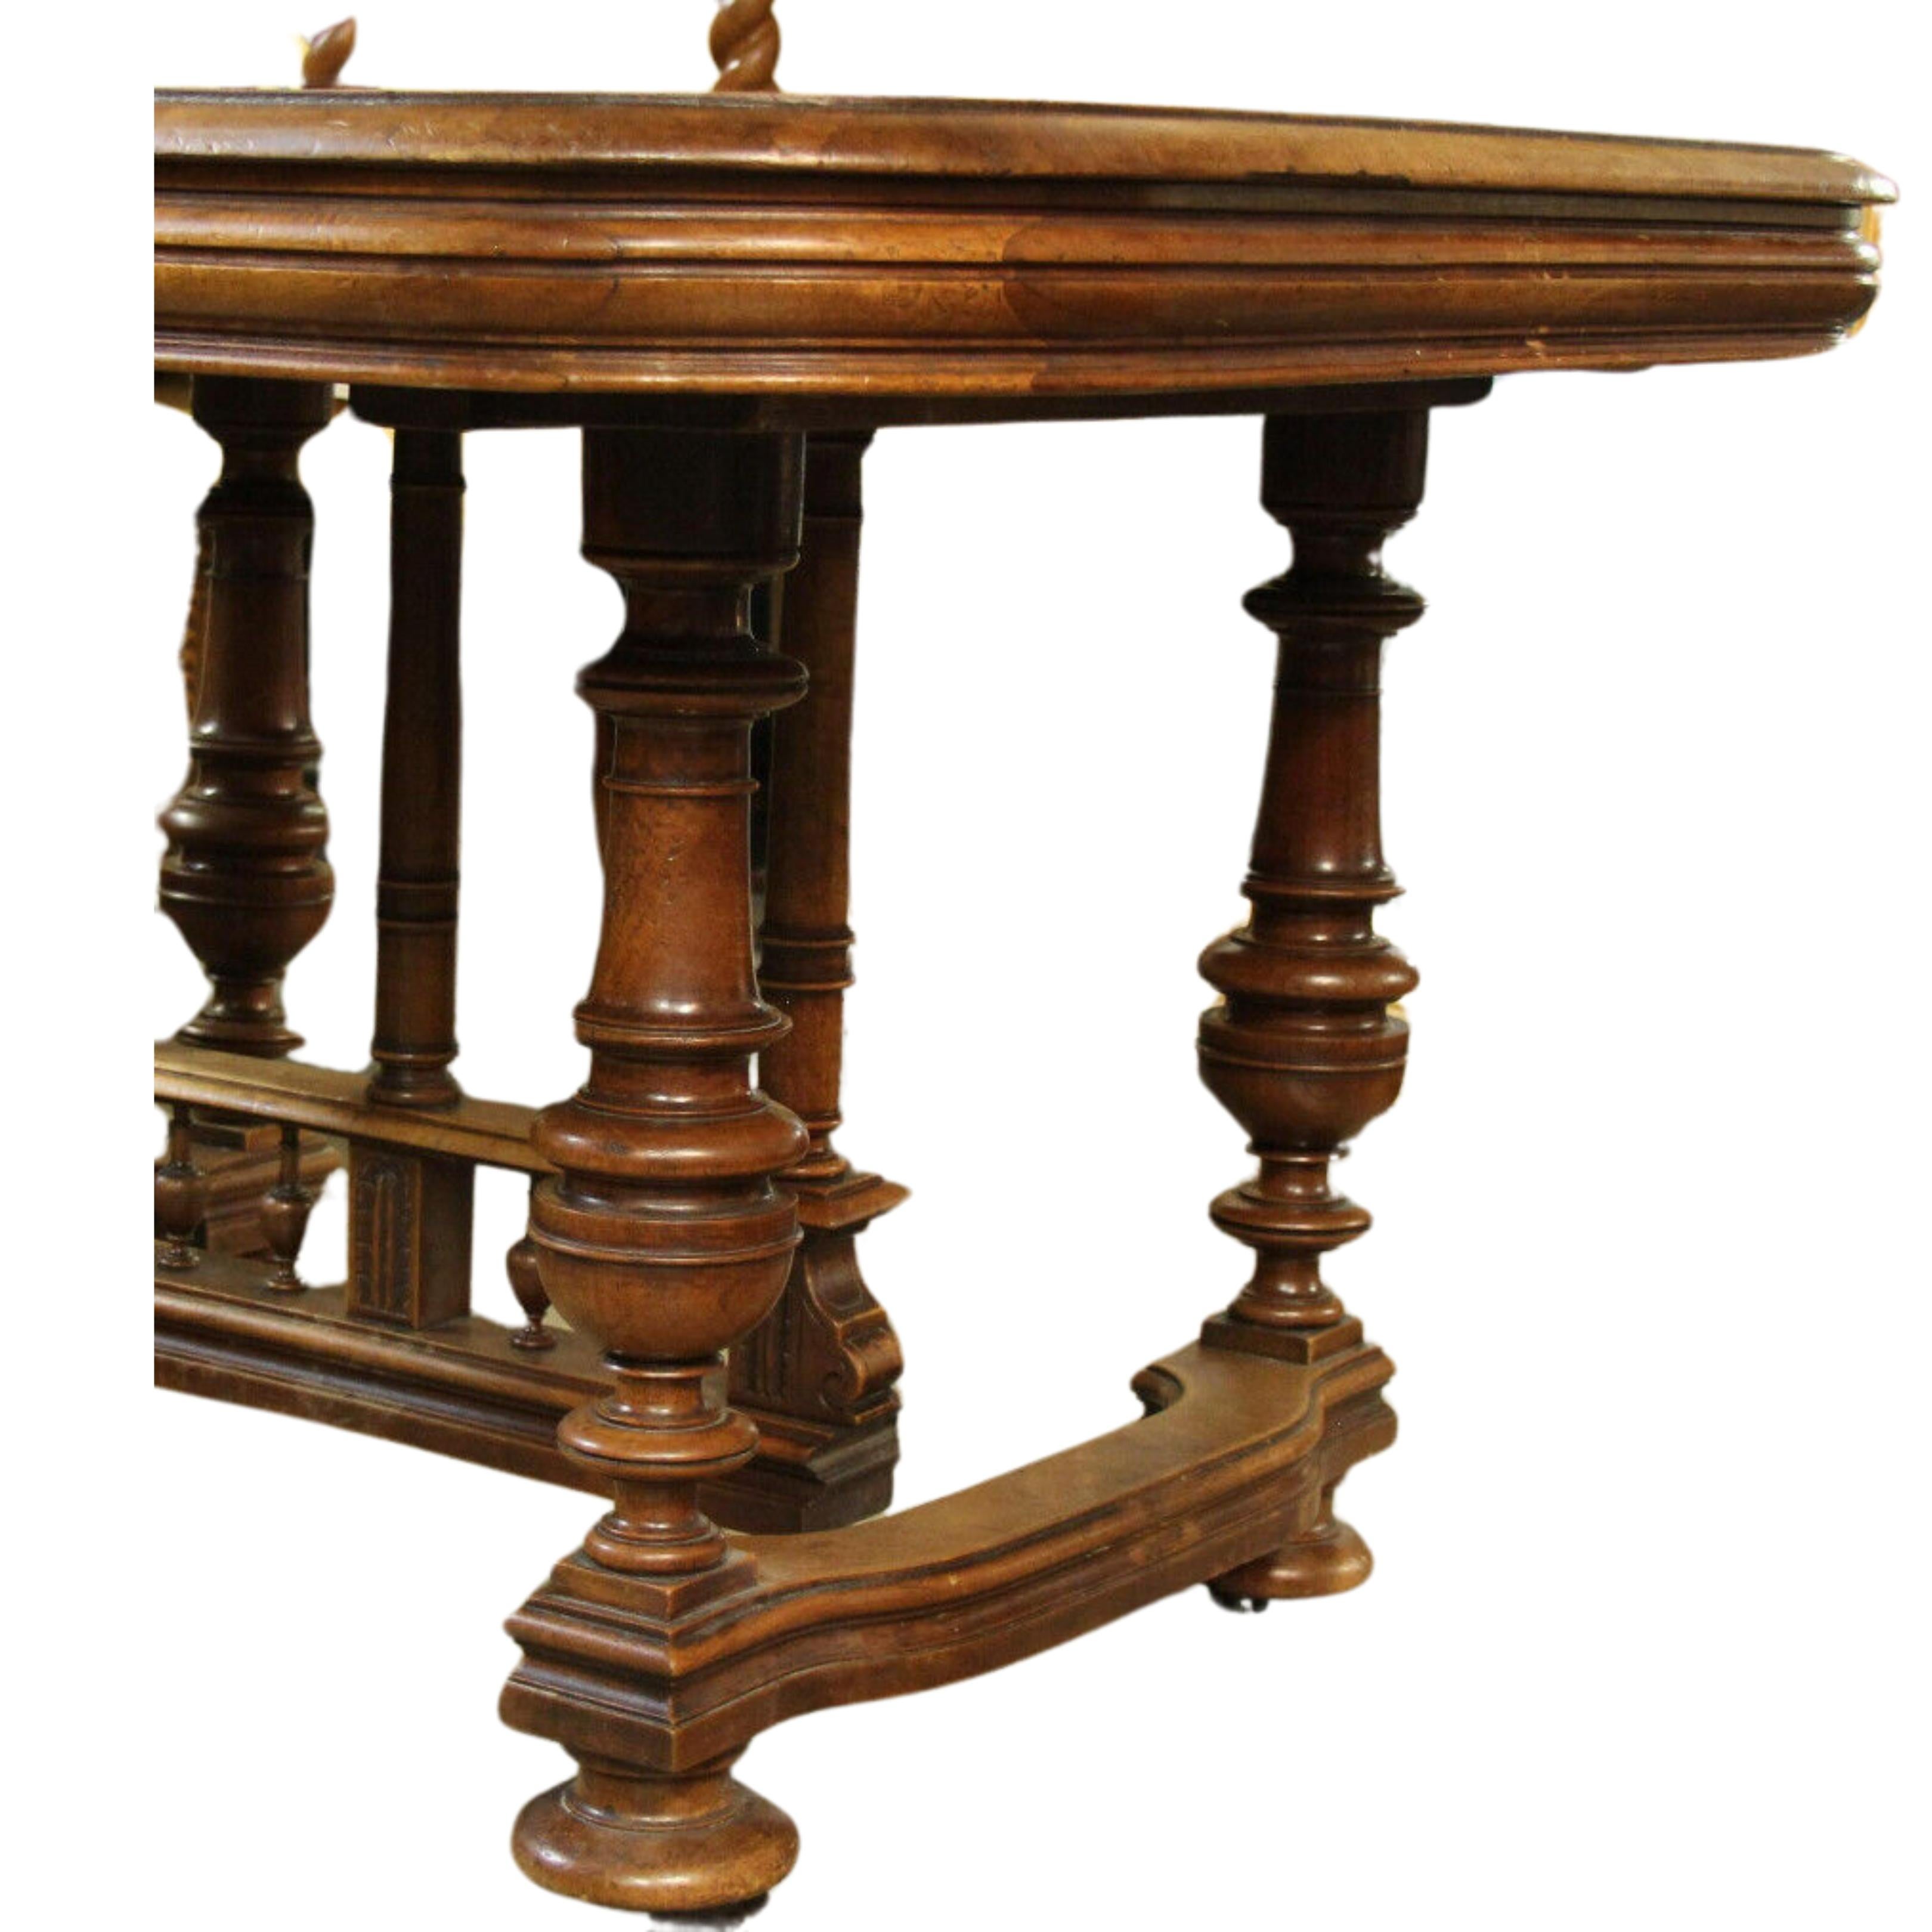 Gorgeous Antique Table, Dining, Square, French, Dark Wood Tones, 19th Century,  1800s!!

This antique French dining table is a beautiful piece with a rich history dating back to the 19th century. The table is square-shaped with dark wood tones and